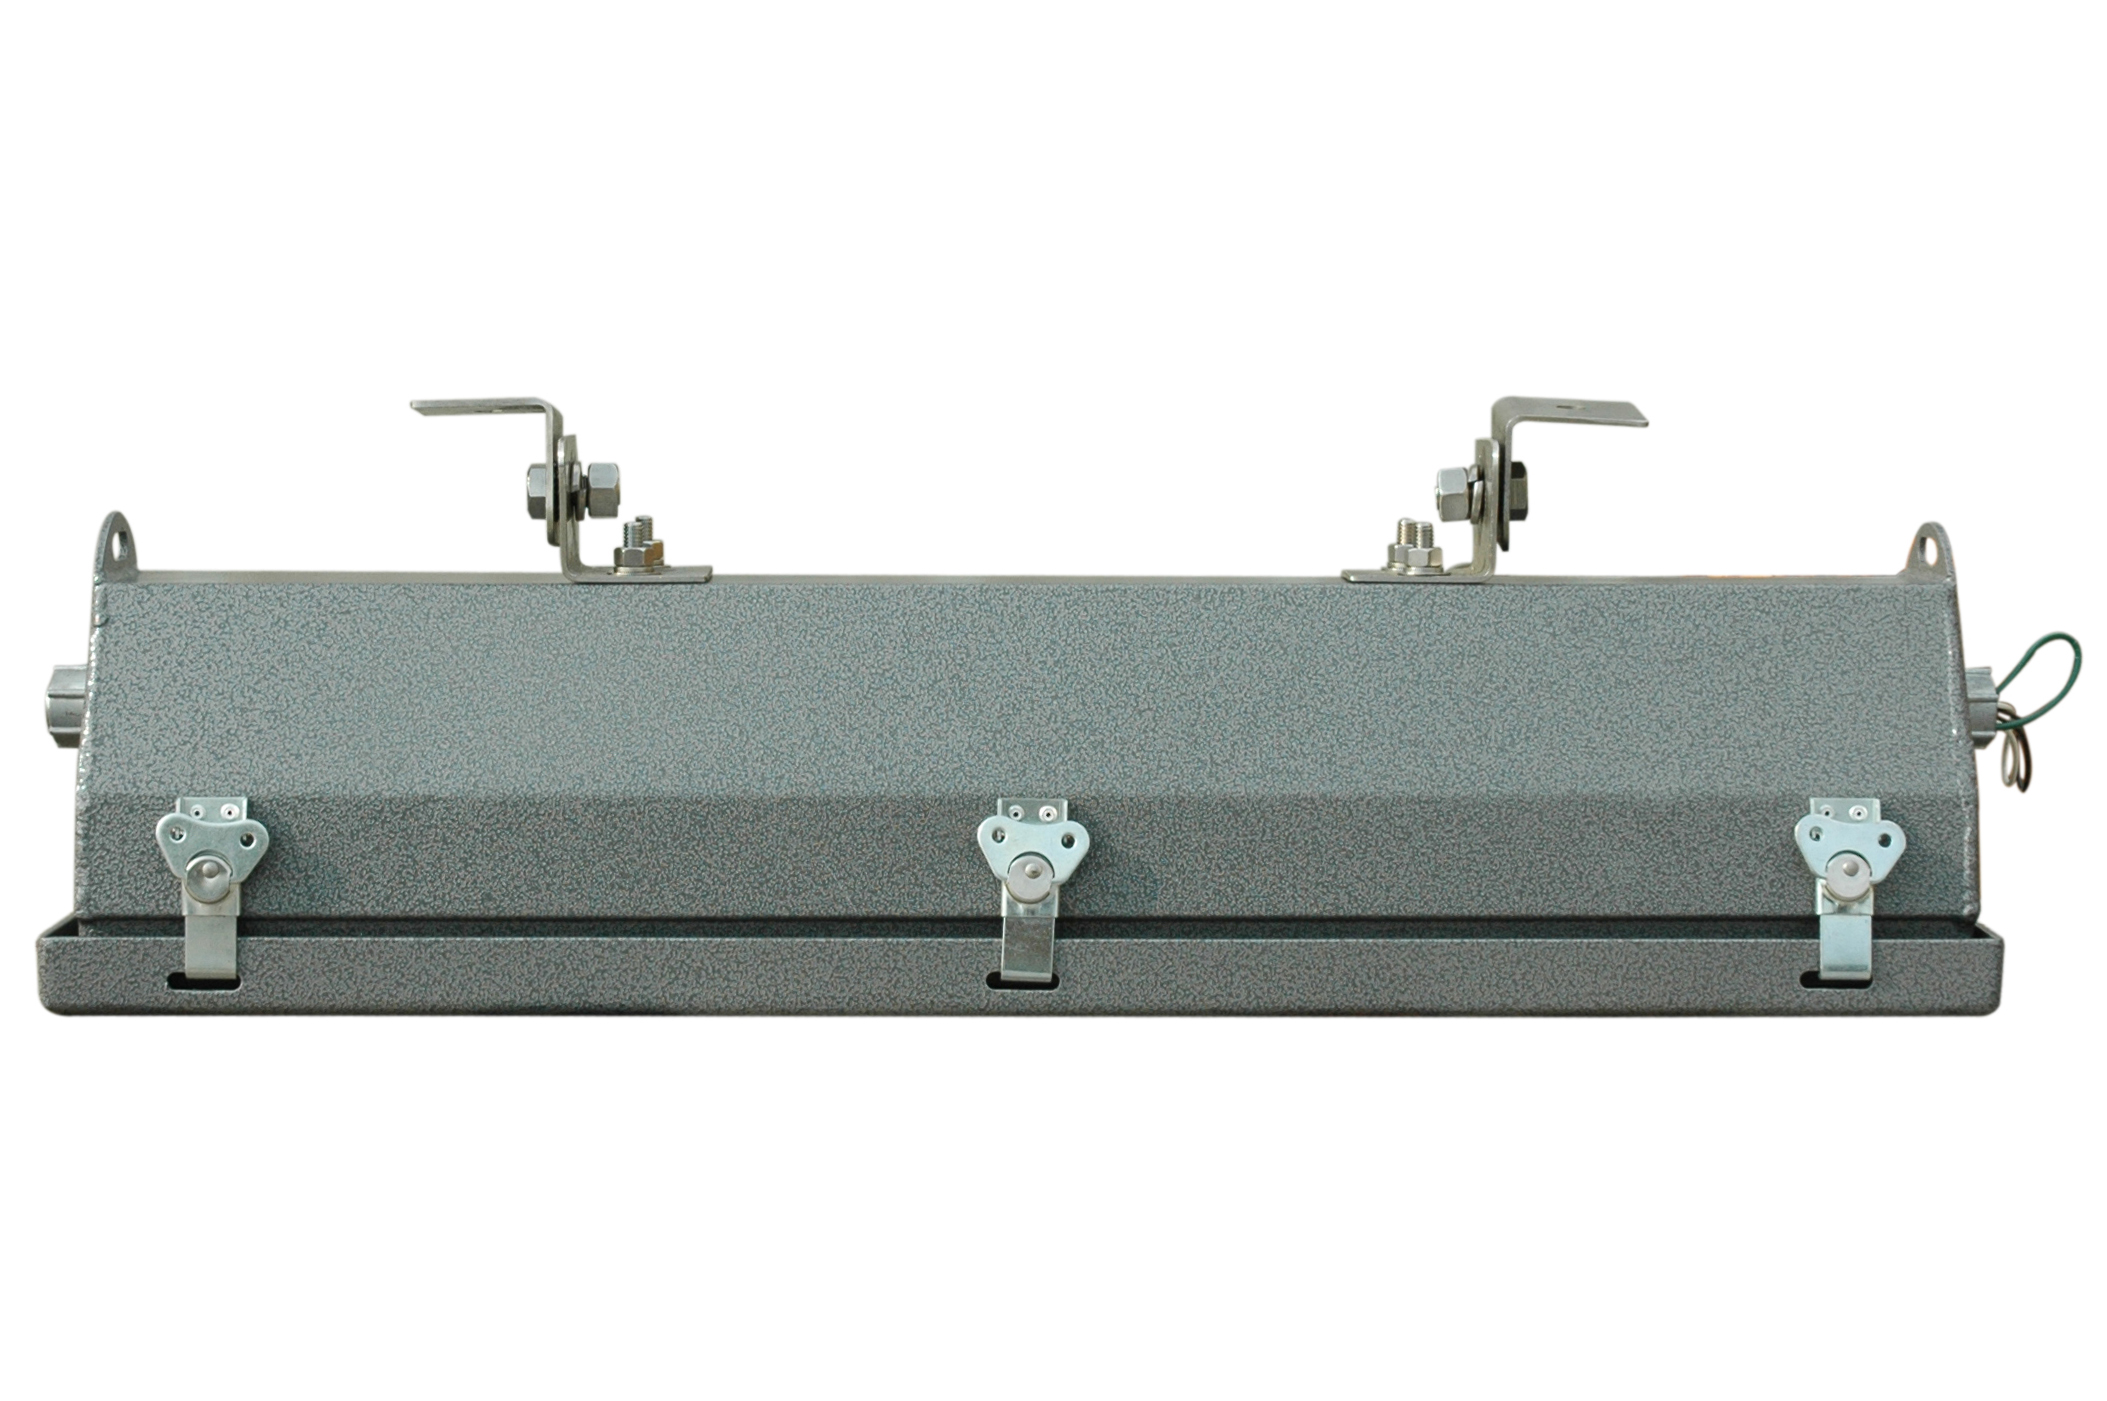 Hazardous Area LED Rig Light Fixture with Class 1 Division 2 approvals